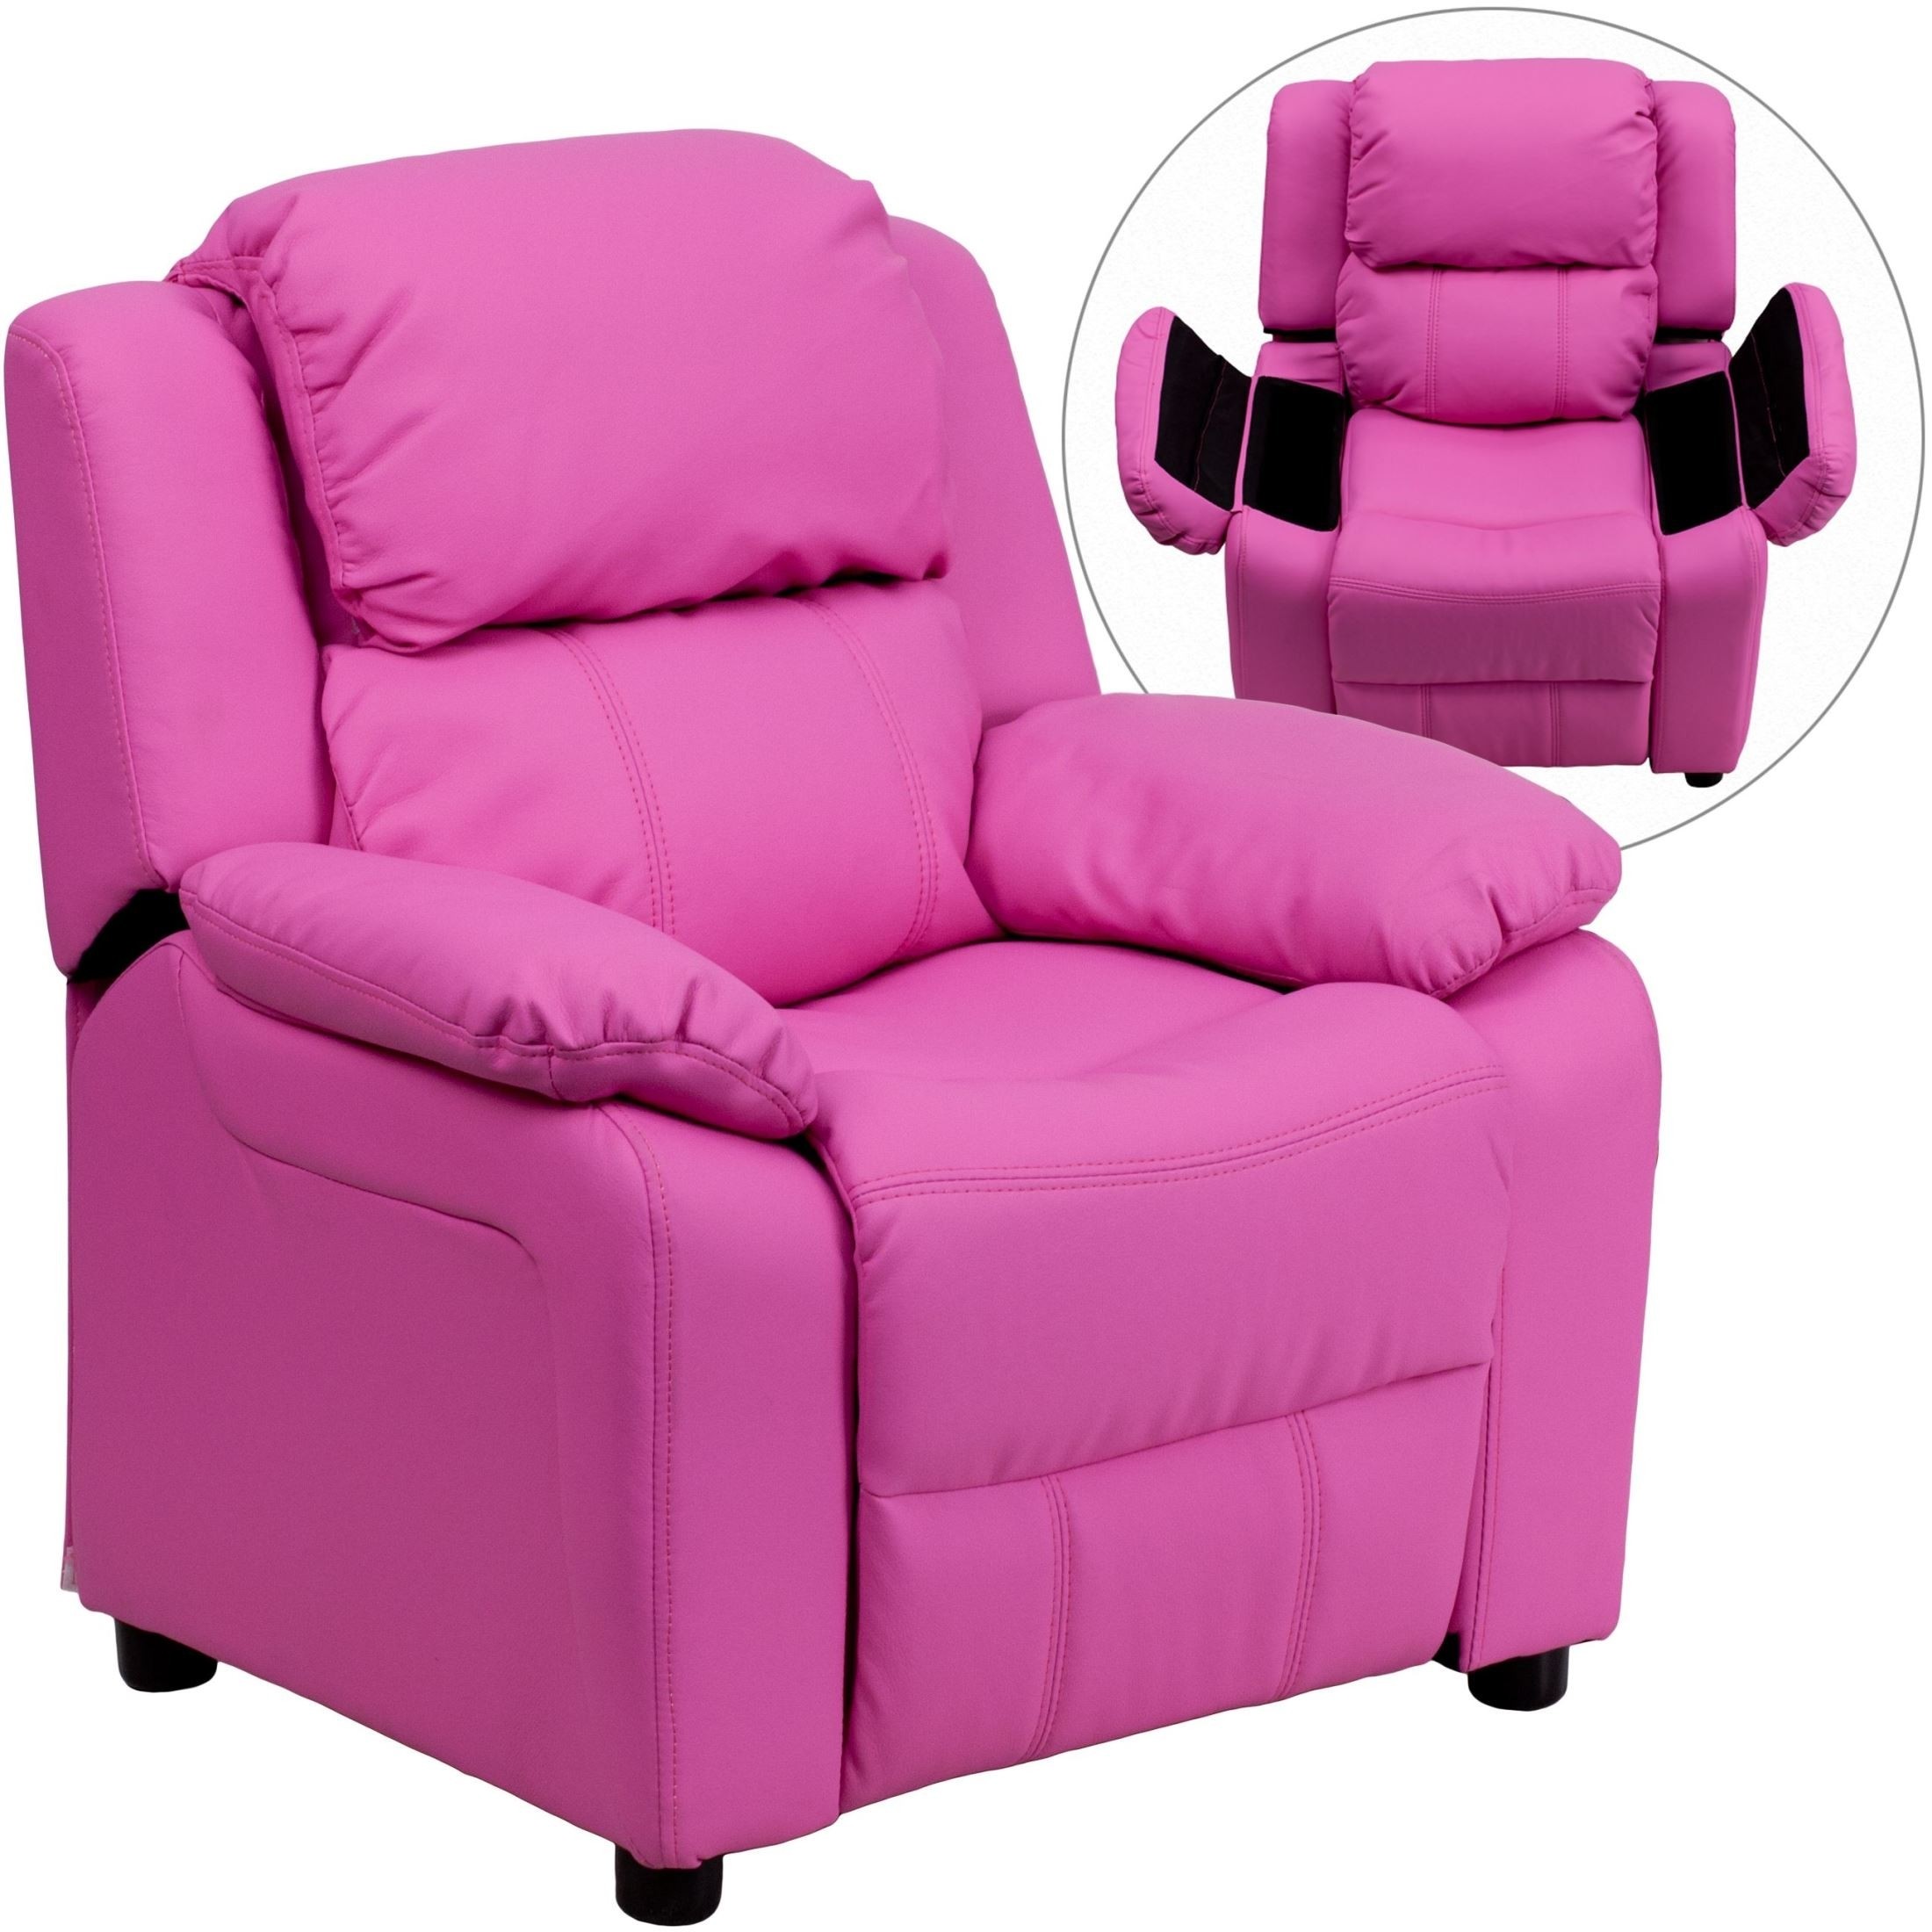 Flash Furniture Deluxe Heavily Padded Contemporary Hot Pink Vinyl Kids Recliner with Storage Arms [BT-7985-KID-HOT-PINK-GG]